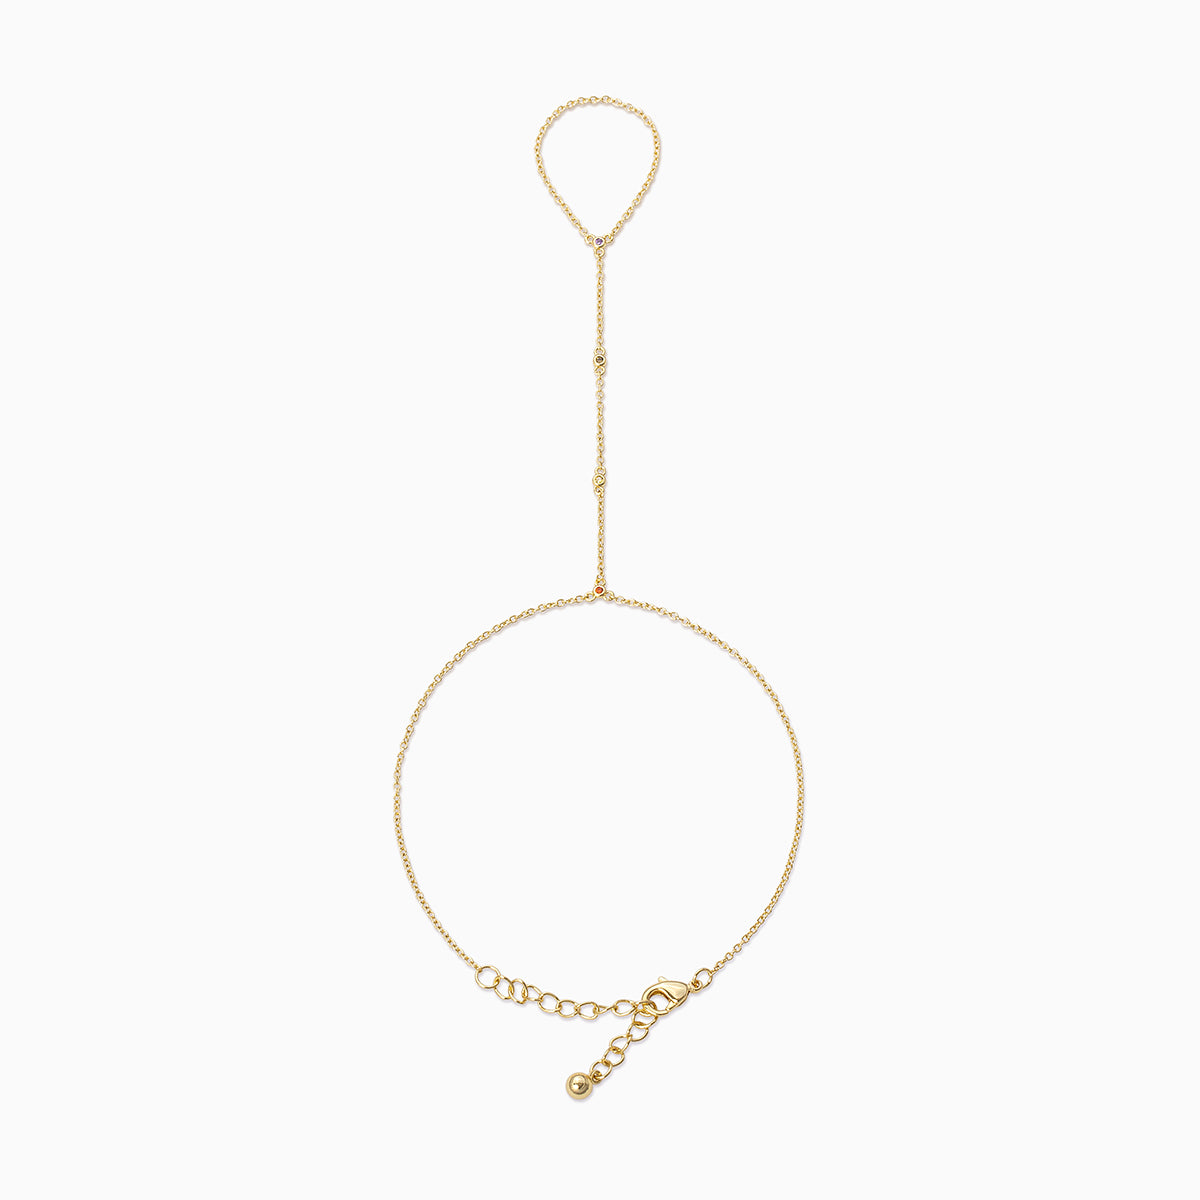 Brightside Dainty Hand Chain in Gold | Uncommon James